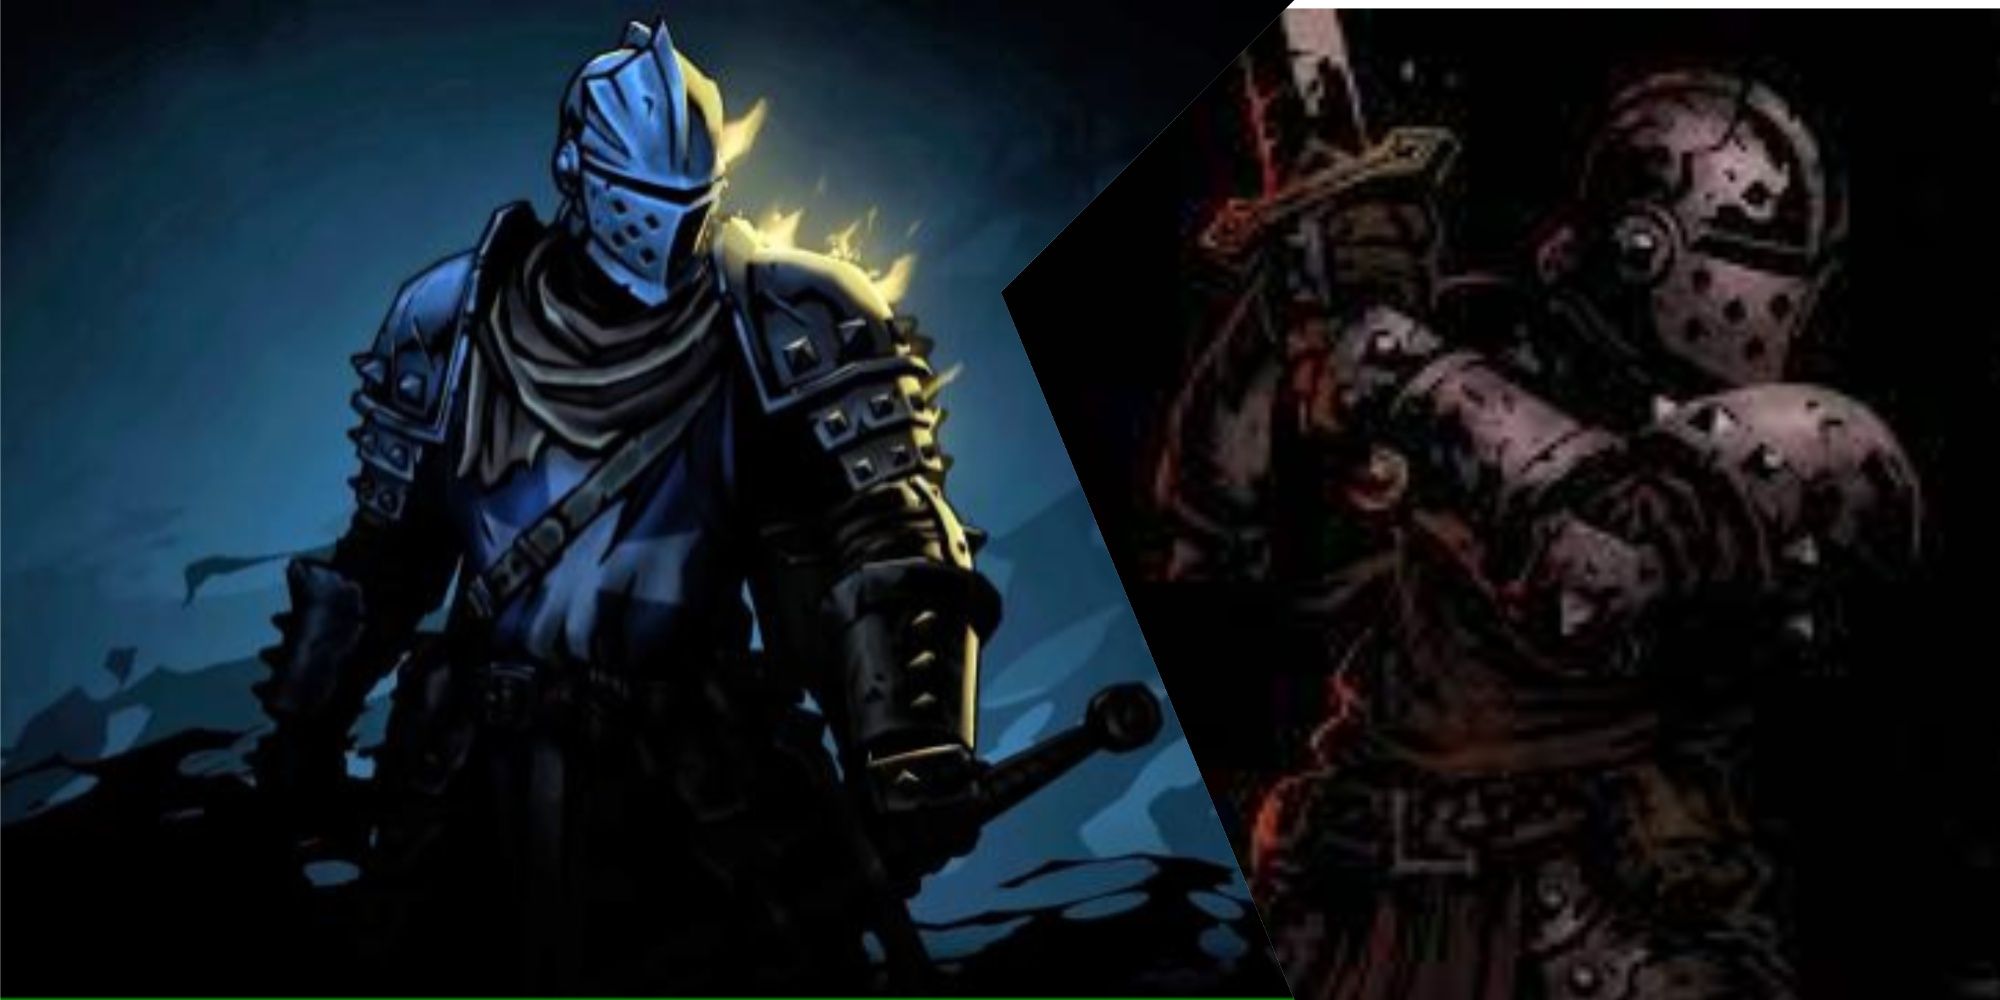 The Crusader from Darkest Dungeon 2 stands to the left of his appearance in the original Darkest Dungeon